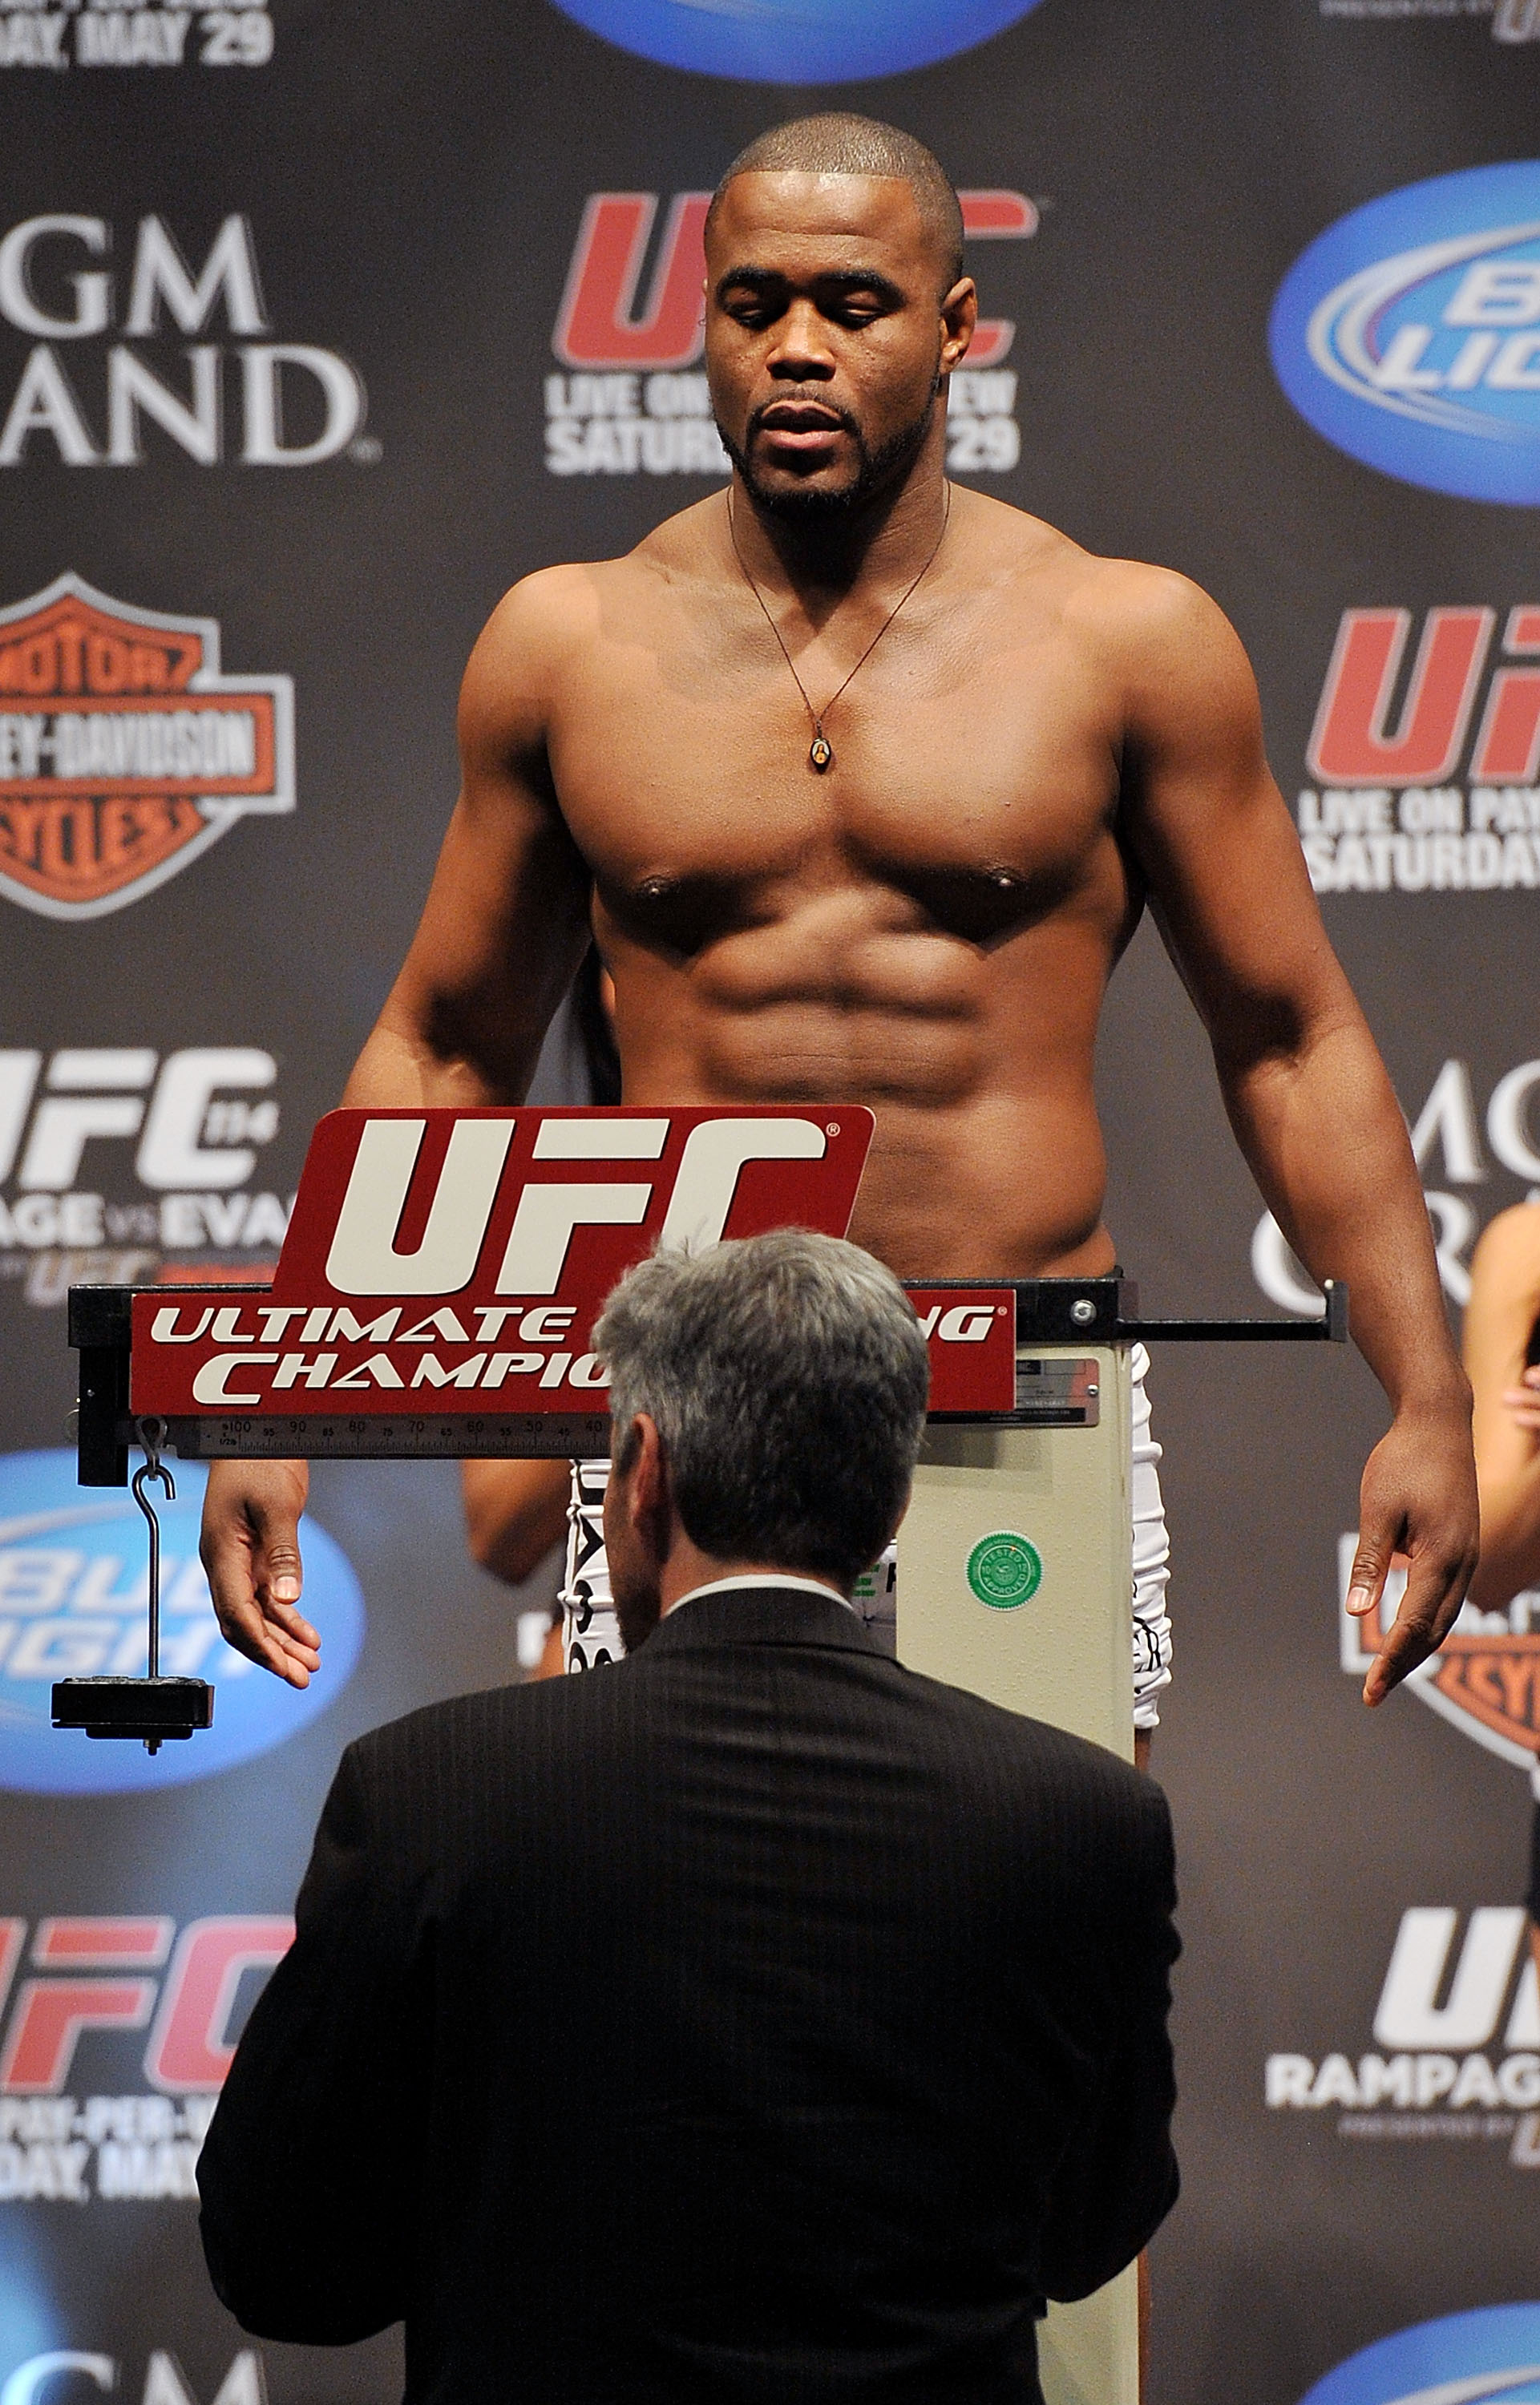 LAS VEGAS - MAY 28:  UFC fighter Rashad Evans weighs in for his fight against UFC fighter Quinton 'Rampage' Jackson at UFC 114: Rampage versus Rashad at the Mandalay Bay Hotel on May 28, 2010 in Las Vegas, Nevada.  (Photo by Jon Kopaloff/Getty Images)